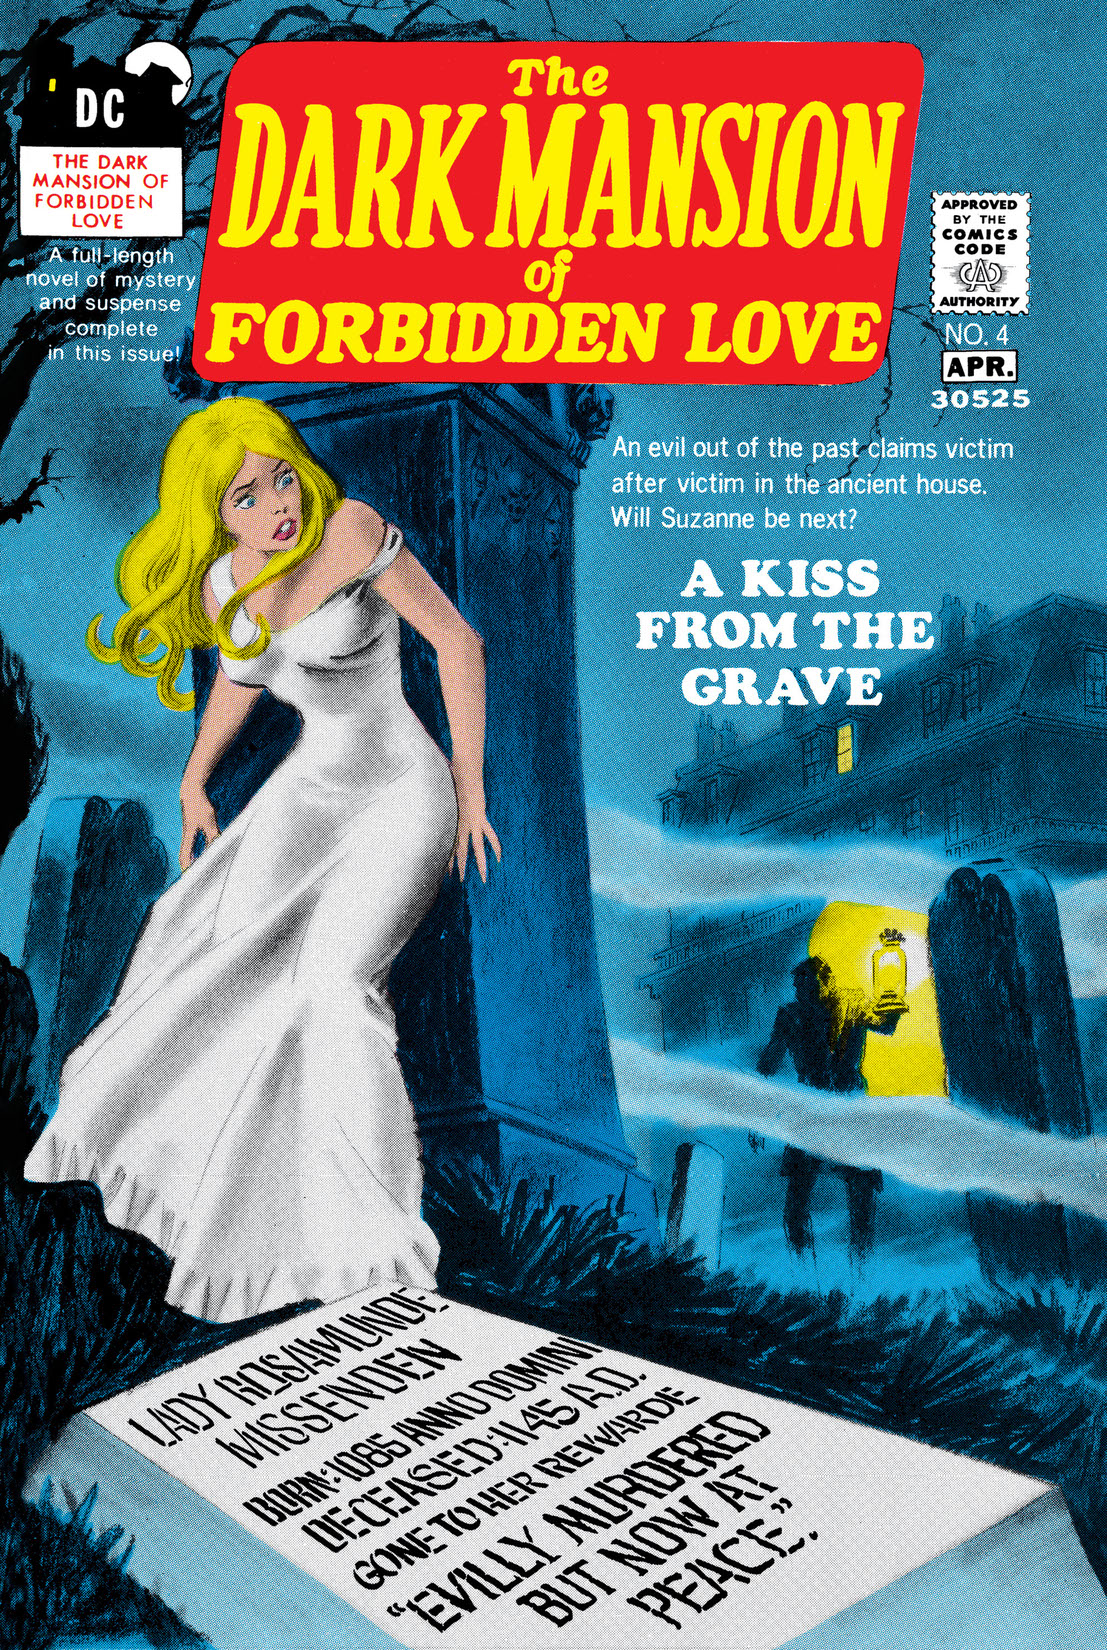 The Dark Mansion of Forbidden Love #4 preview images